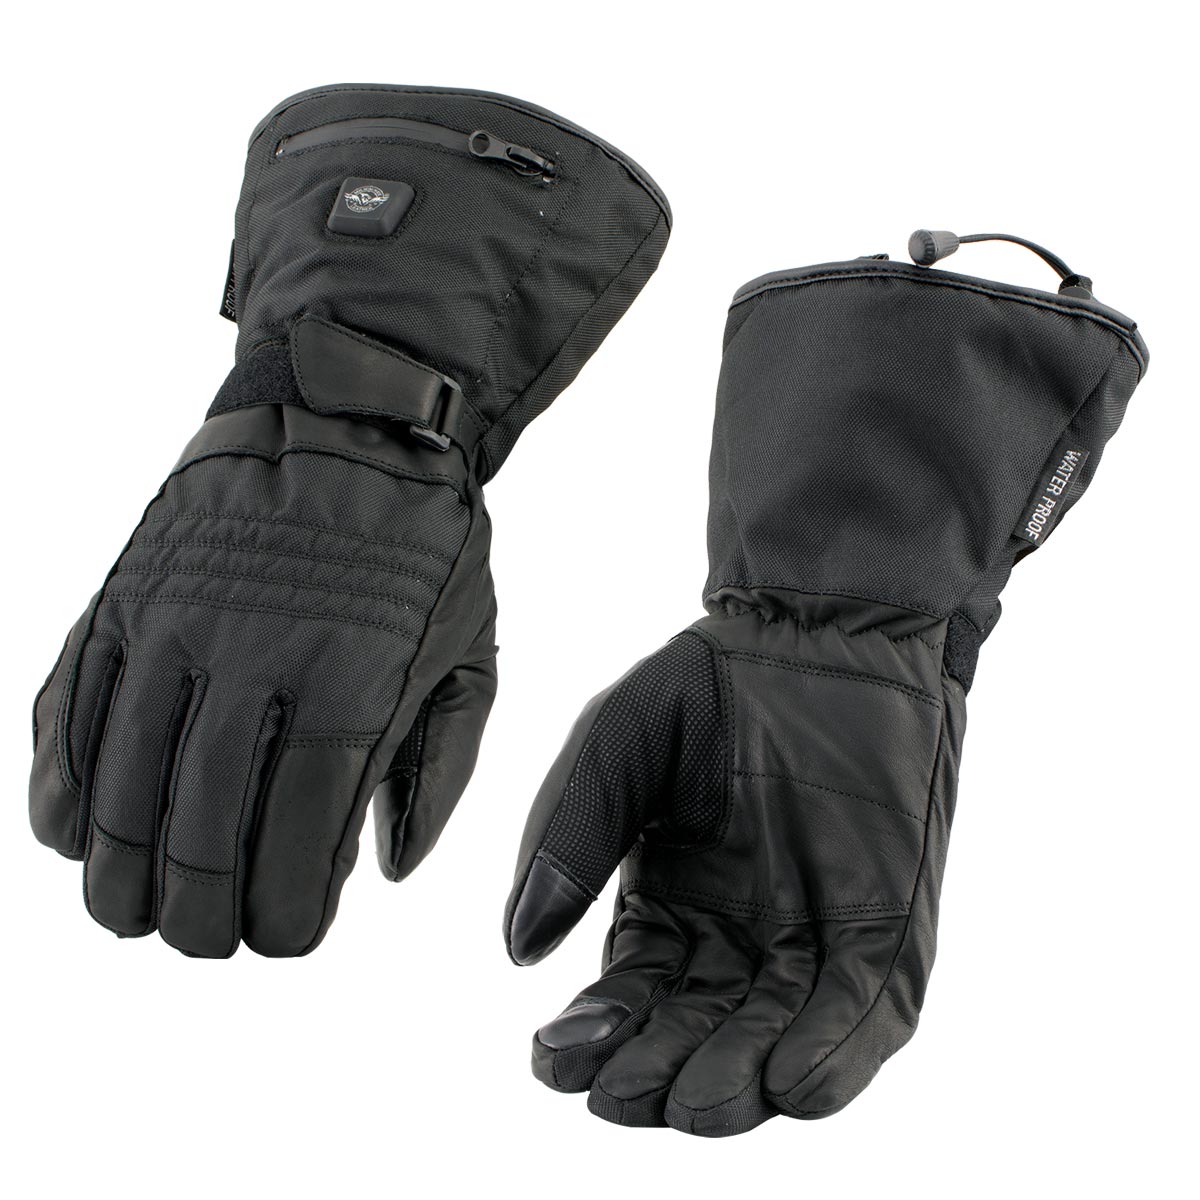 Xelement XG17501SET Men’s Black Heated Textile & Leather Combo Gauntlet Gloves with I-Touch Fingers (Battery Pack Included)